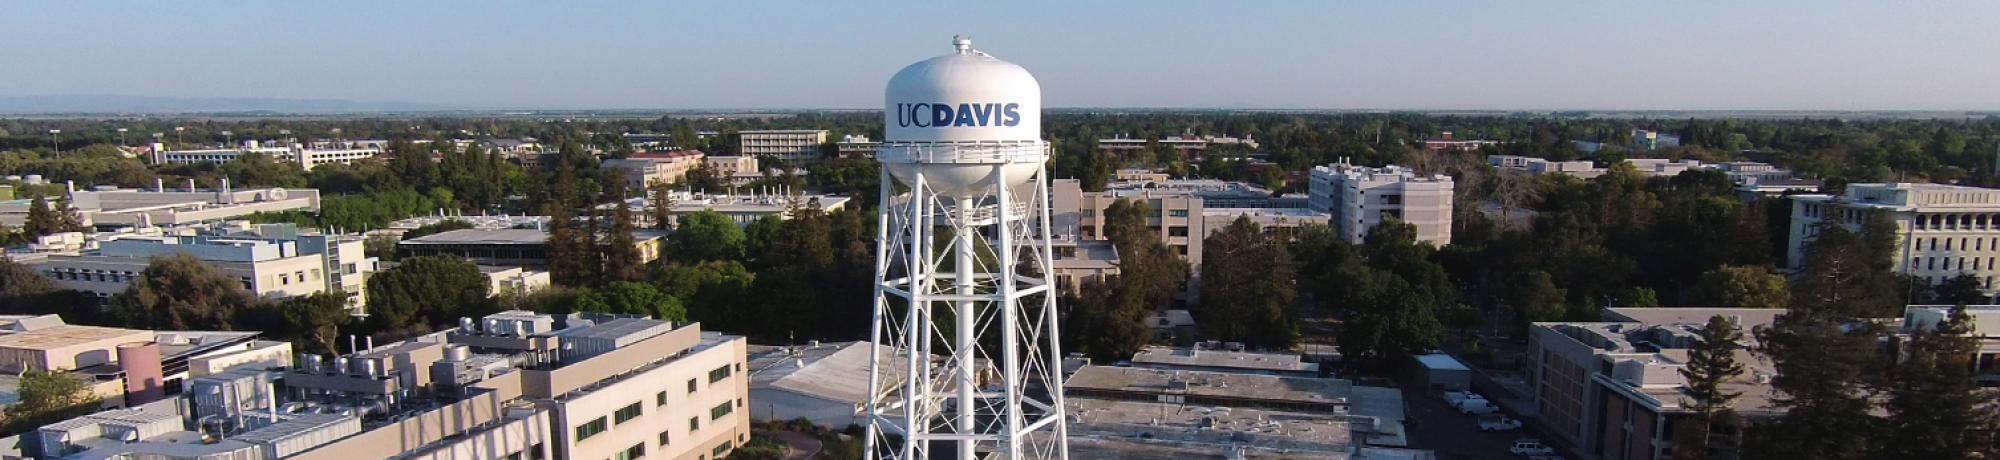 The UC Davis waterpower stands high above the campus.